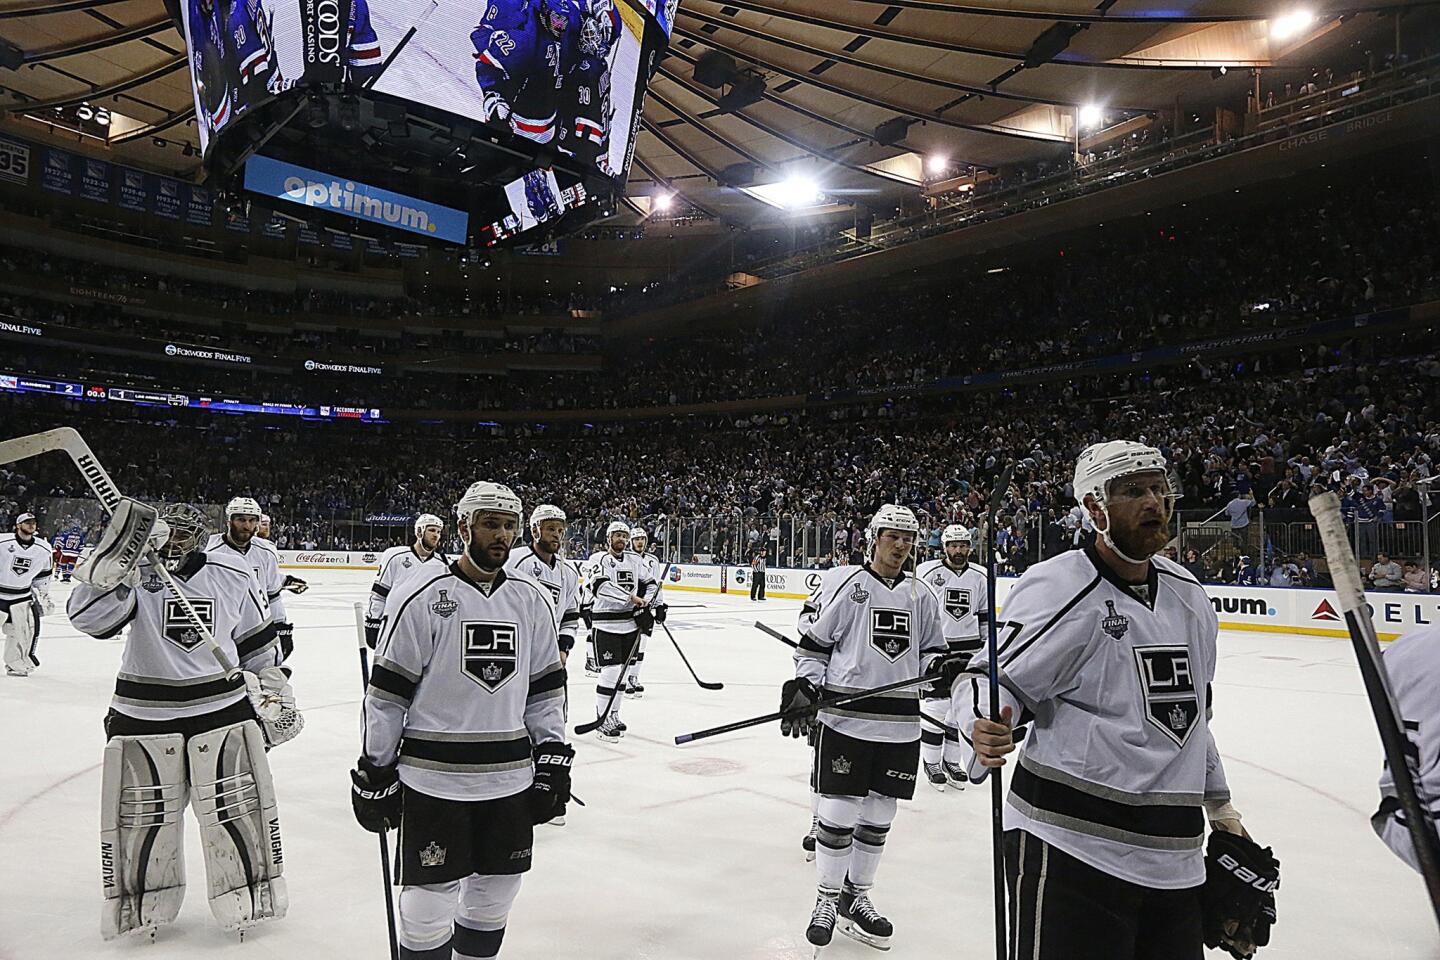 Kings skate off ice after Game 4 loss